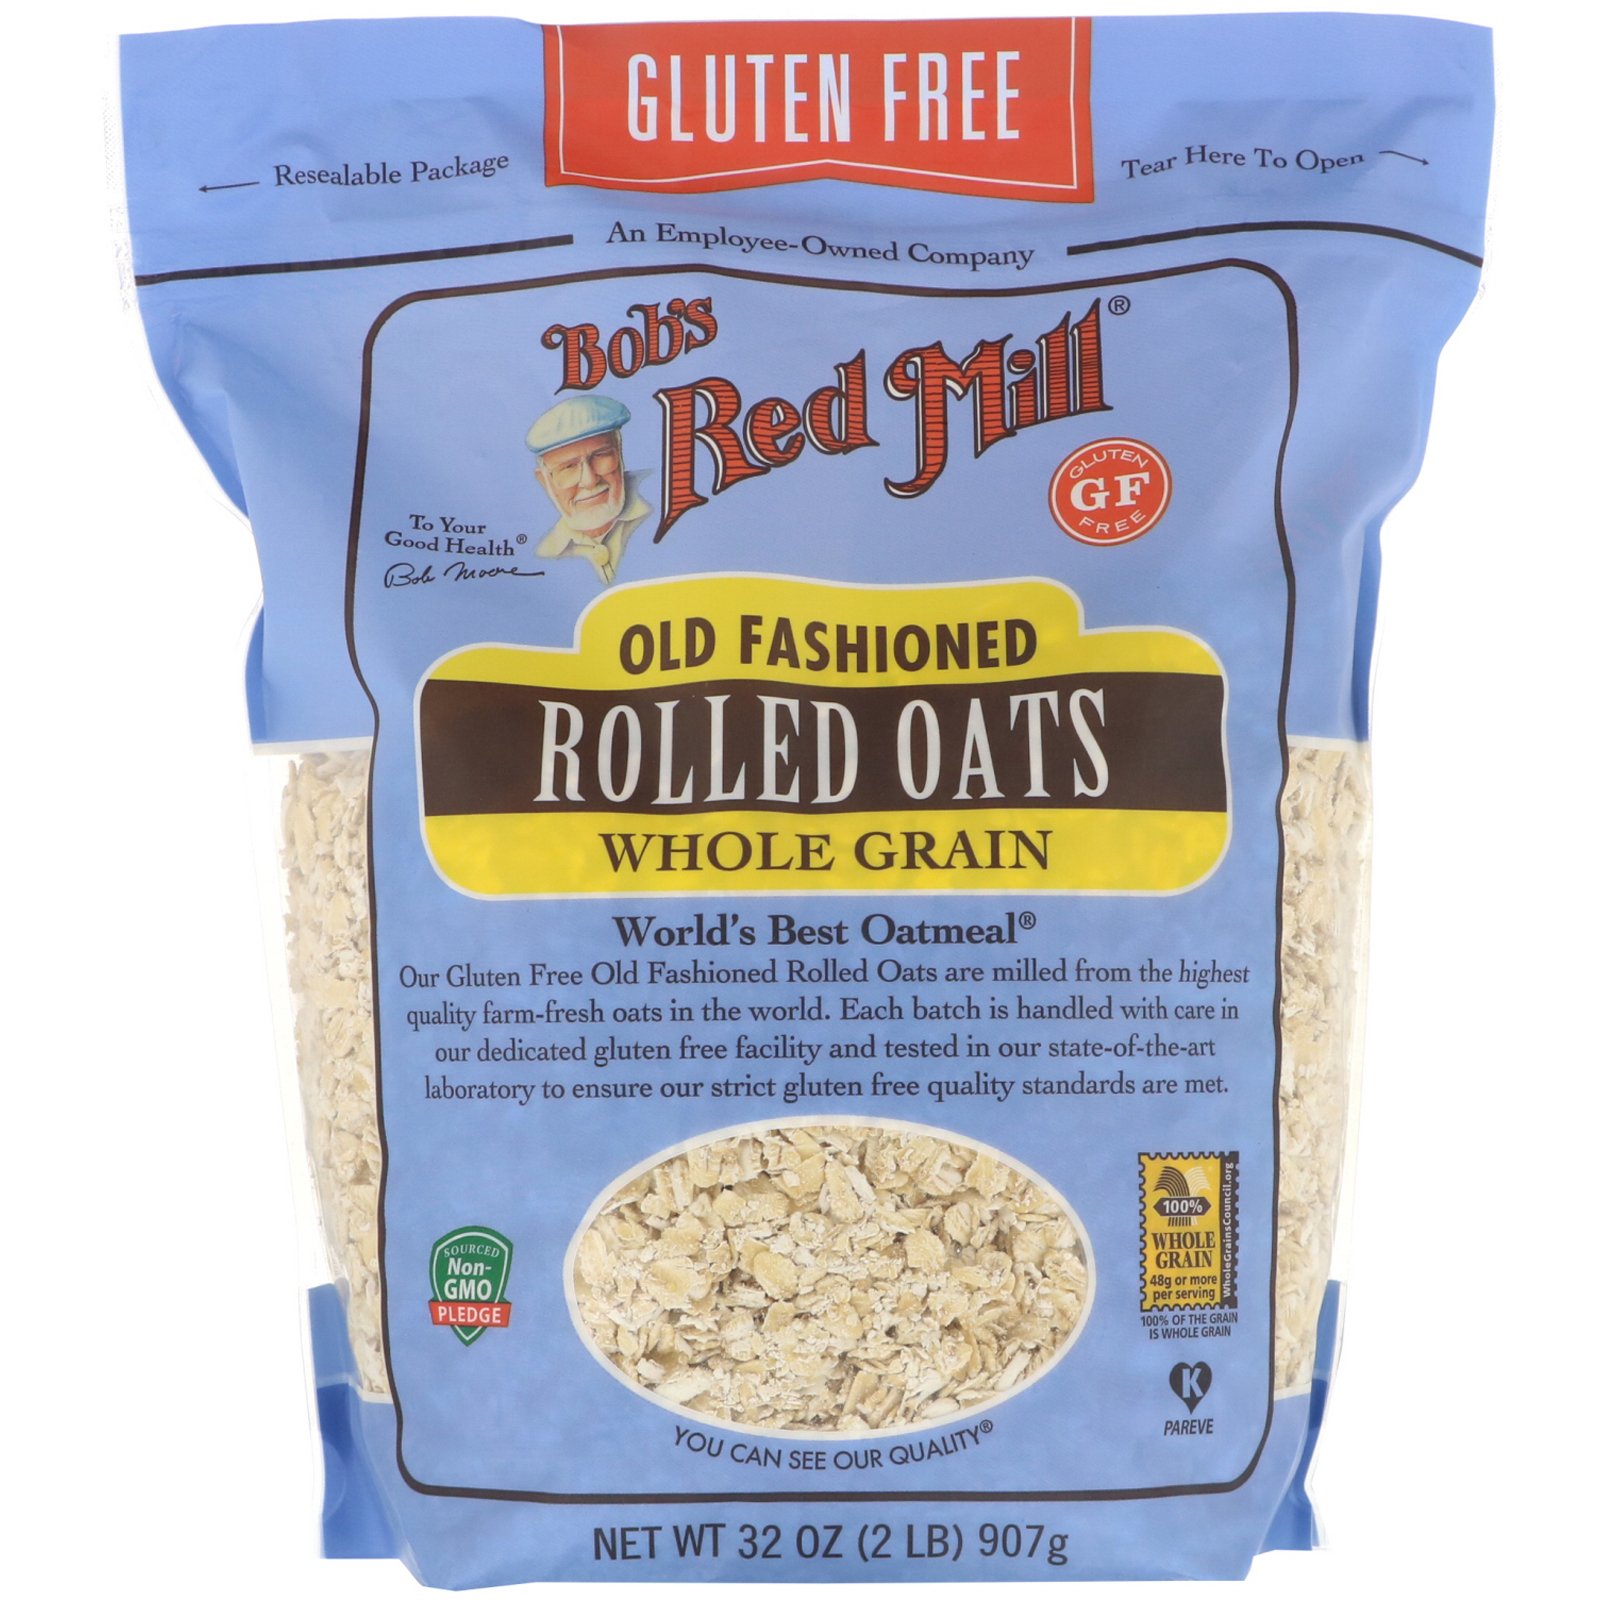 Bob s Red Mill Old Fashioned Rolled Oats Whole Grain Gluten Free 32 oz ...